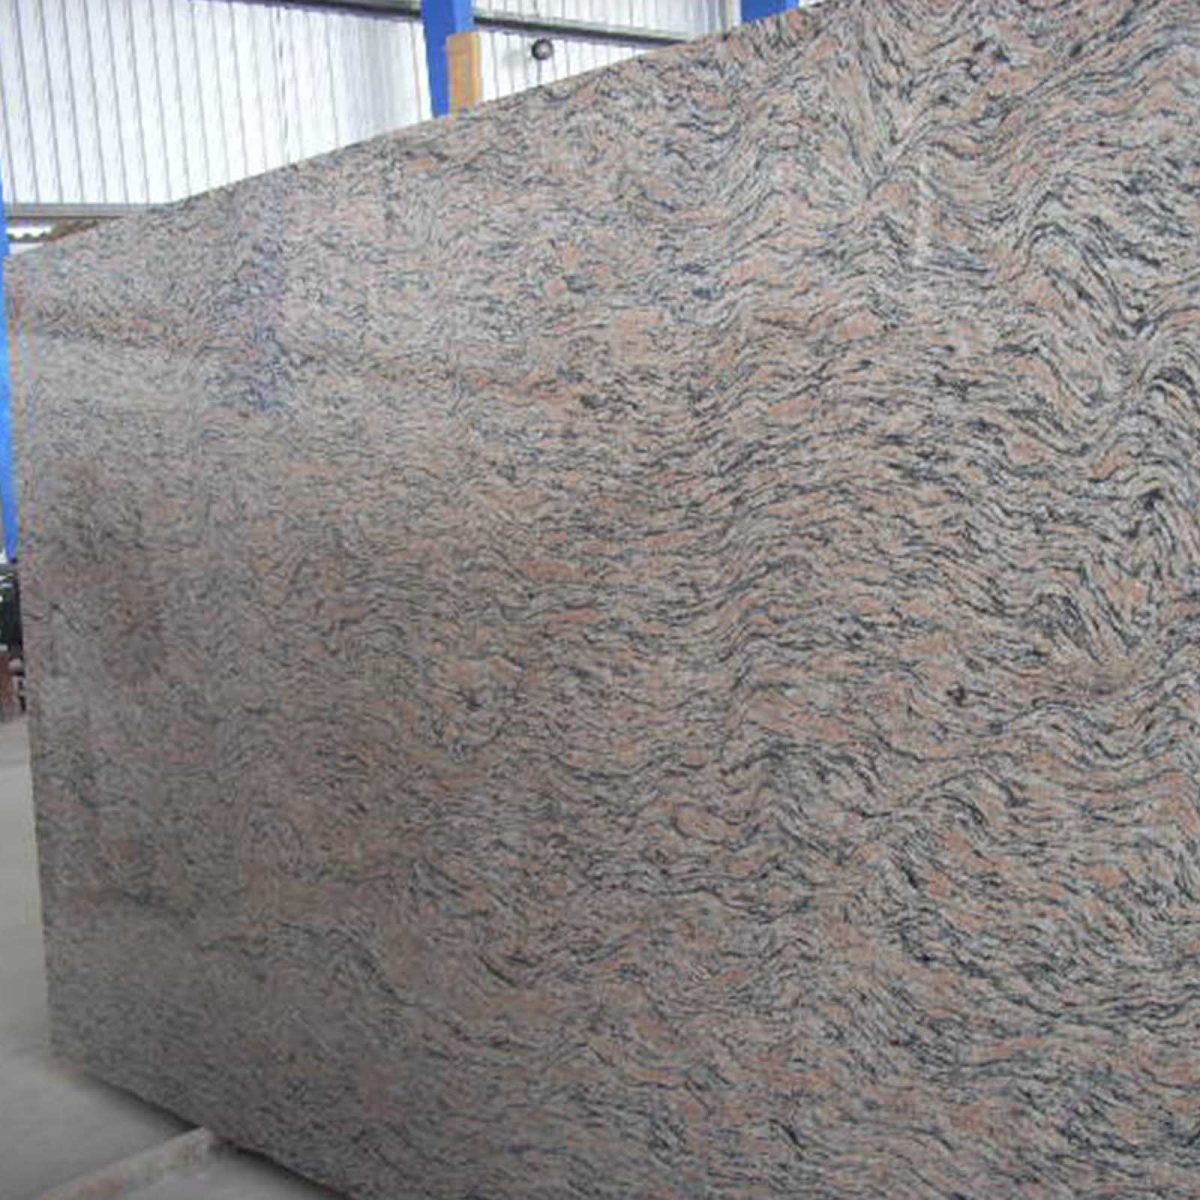 Tiger Skin Granite From Iso Qualified Indian Granite Supplier